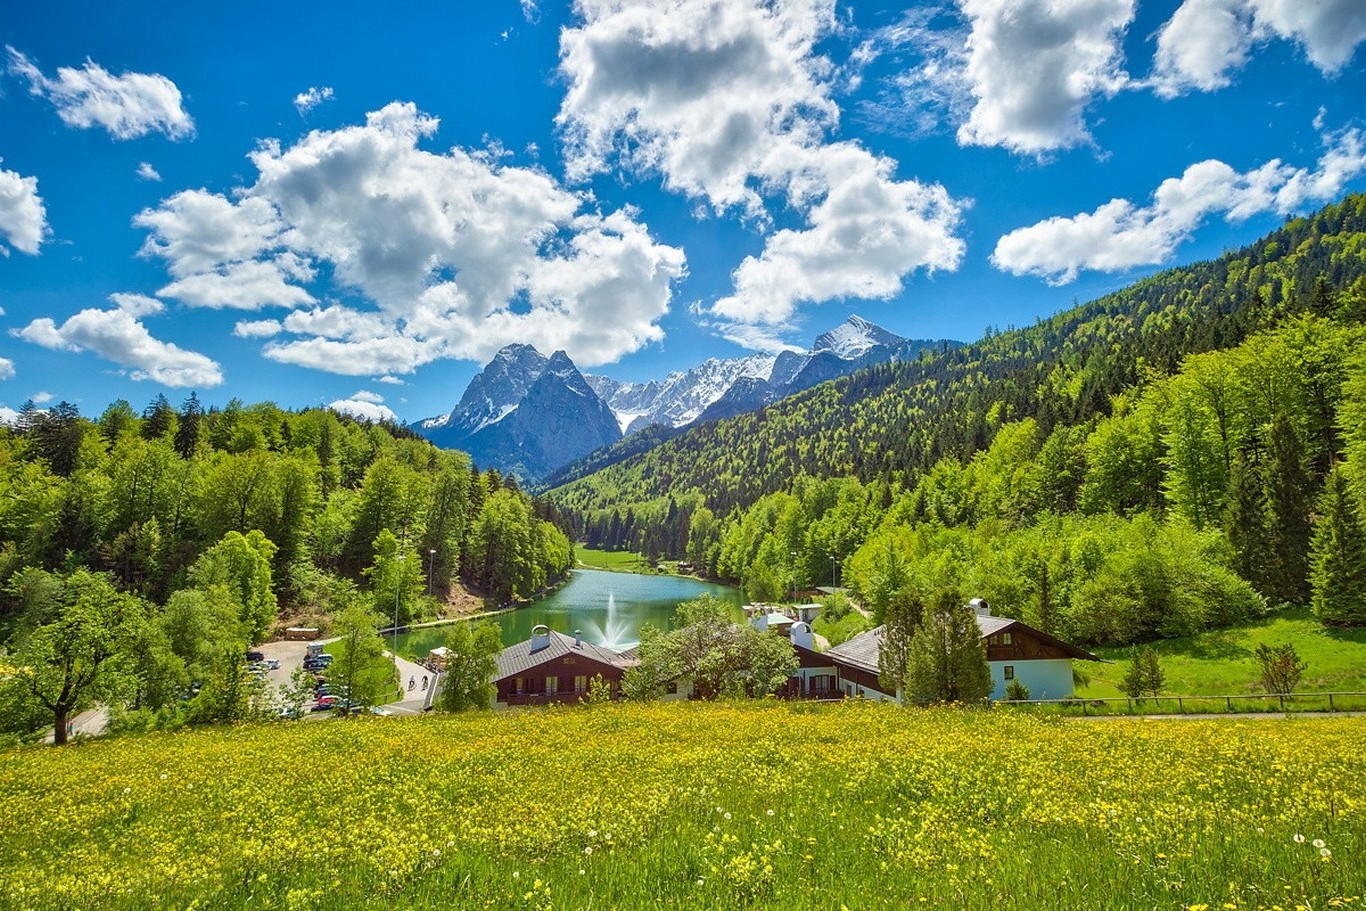 lake, Germany, Summer, Clouds, Green, House, Wildflowers, Mountain